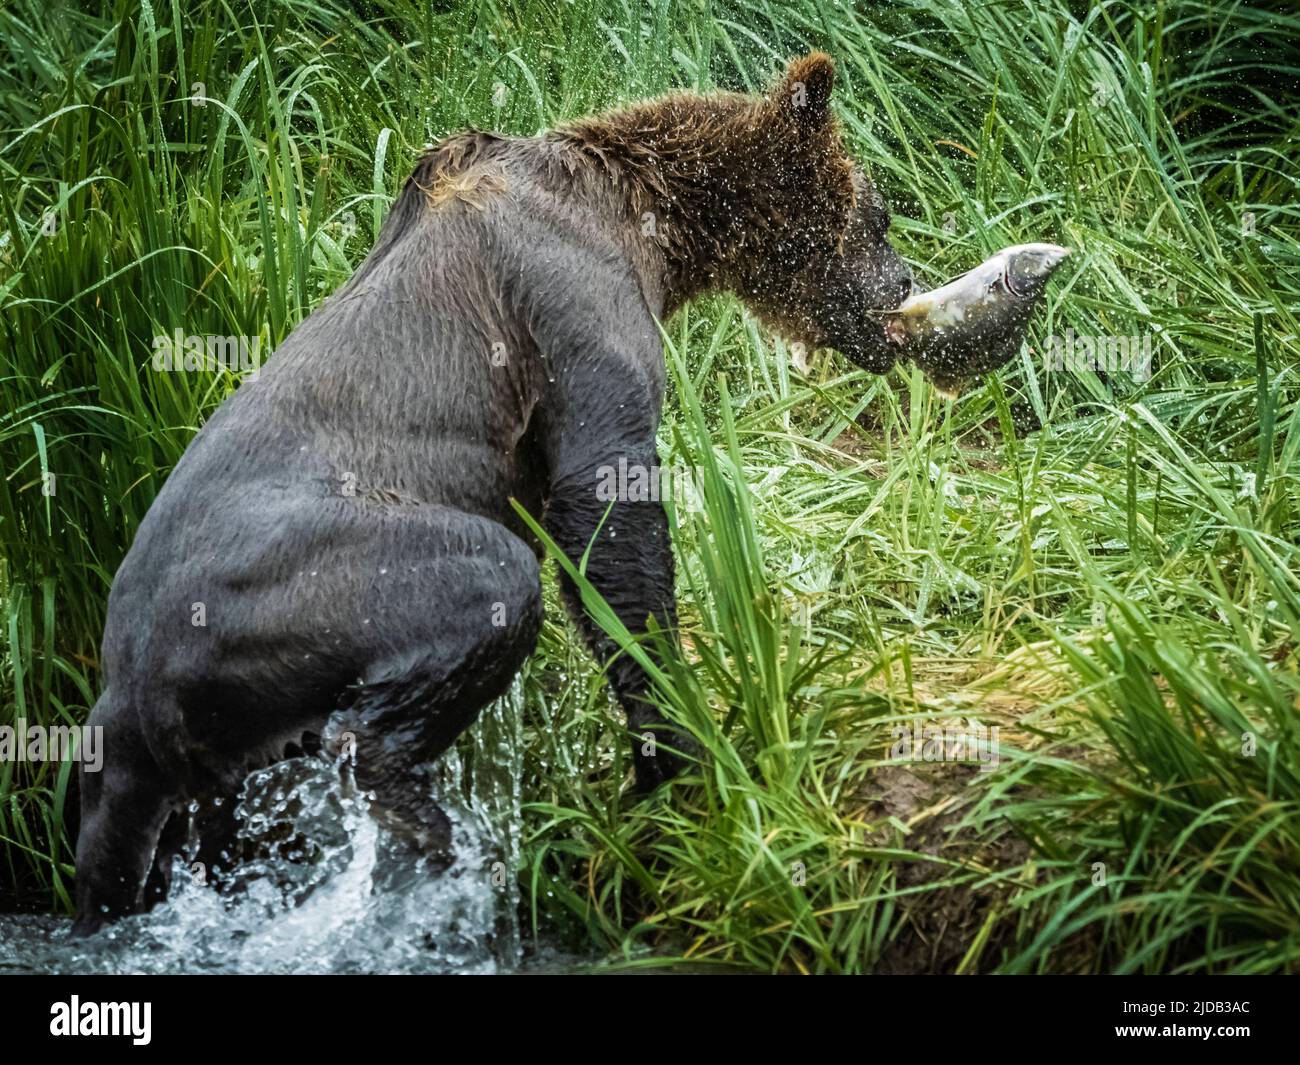 View taken from behind of a Coastal Brown Bear (Ursus arctos horribilis) climbing onto the grassy shore out of the water with salmon in mouth, fish... Stock Photo